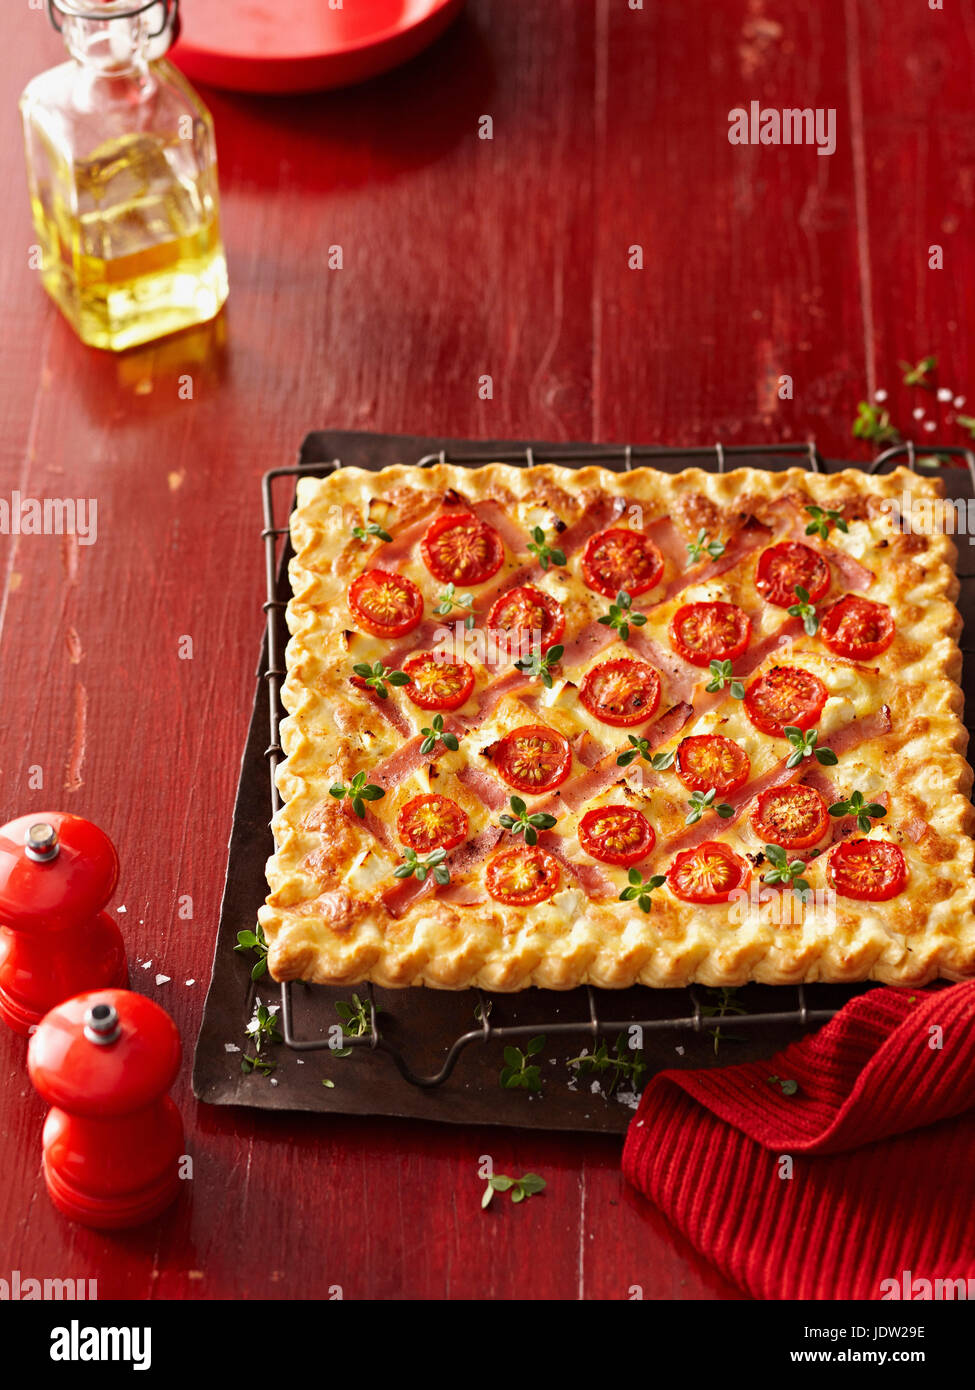 Square pizza with tomatoes and herbs Stock Photo